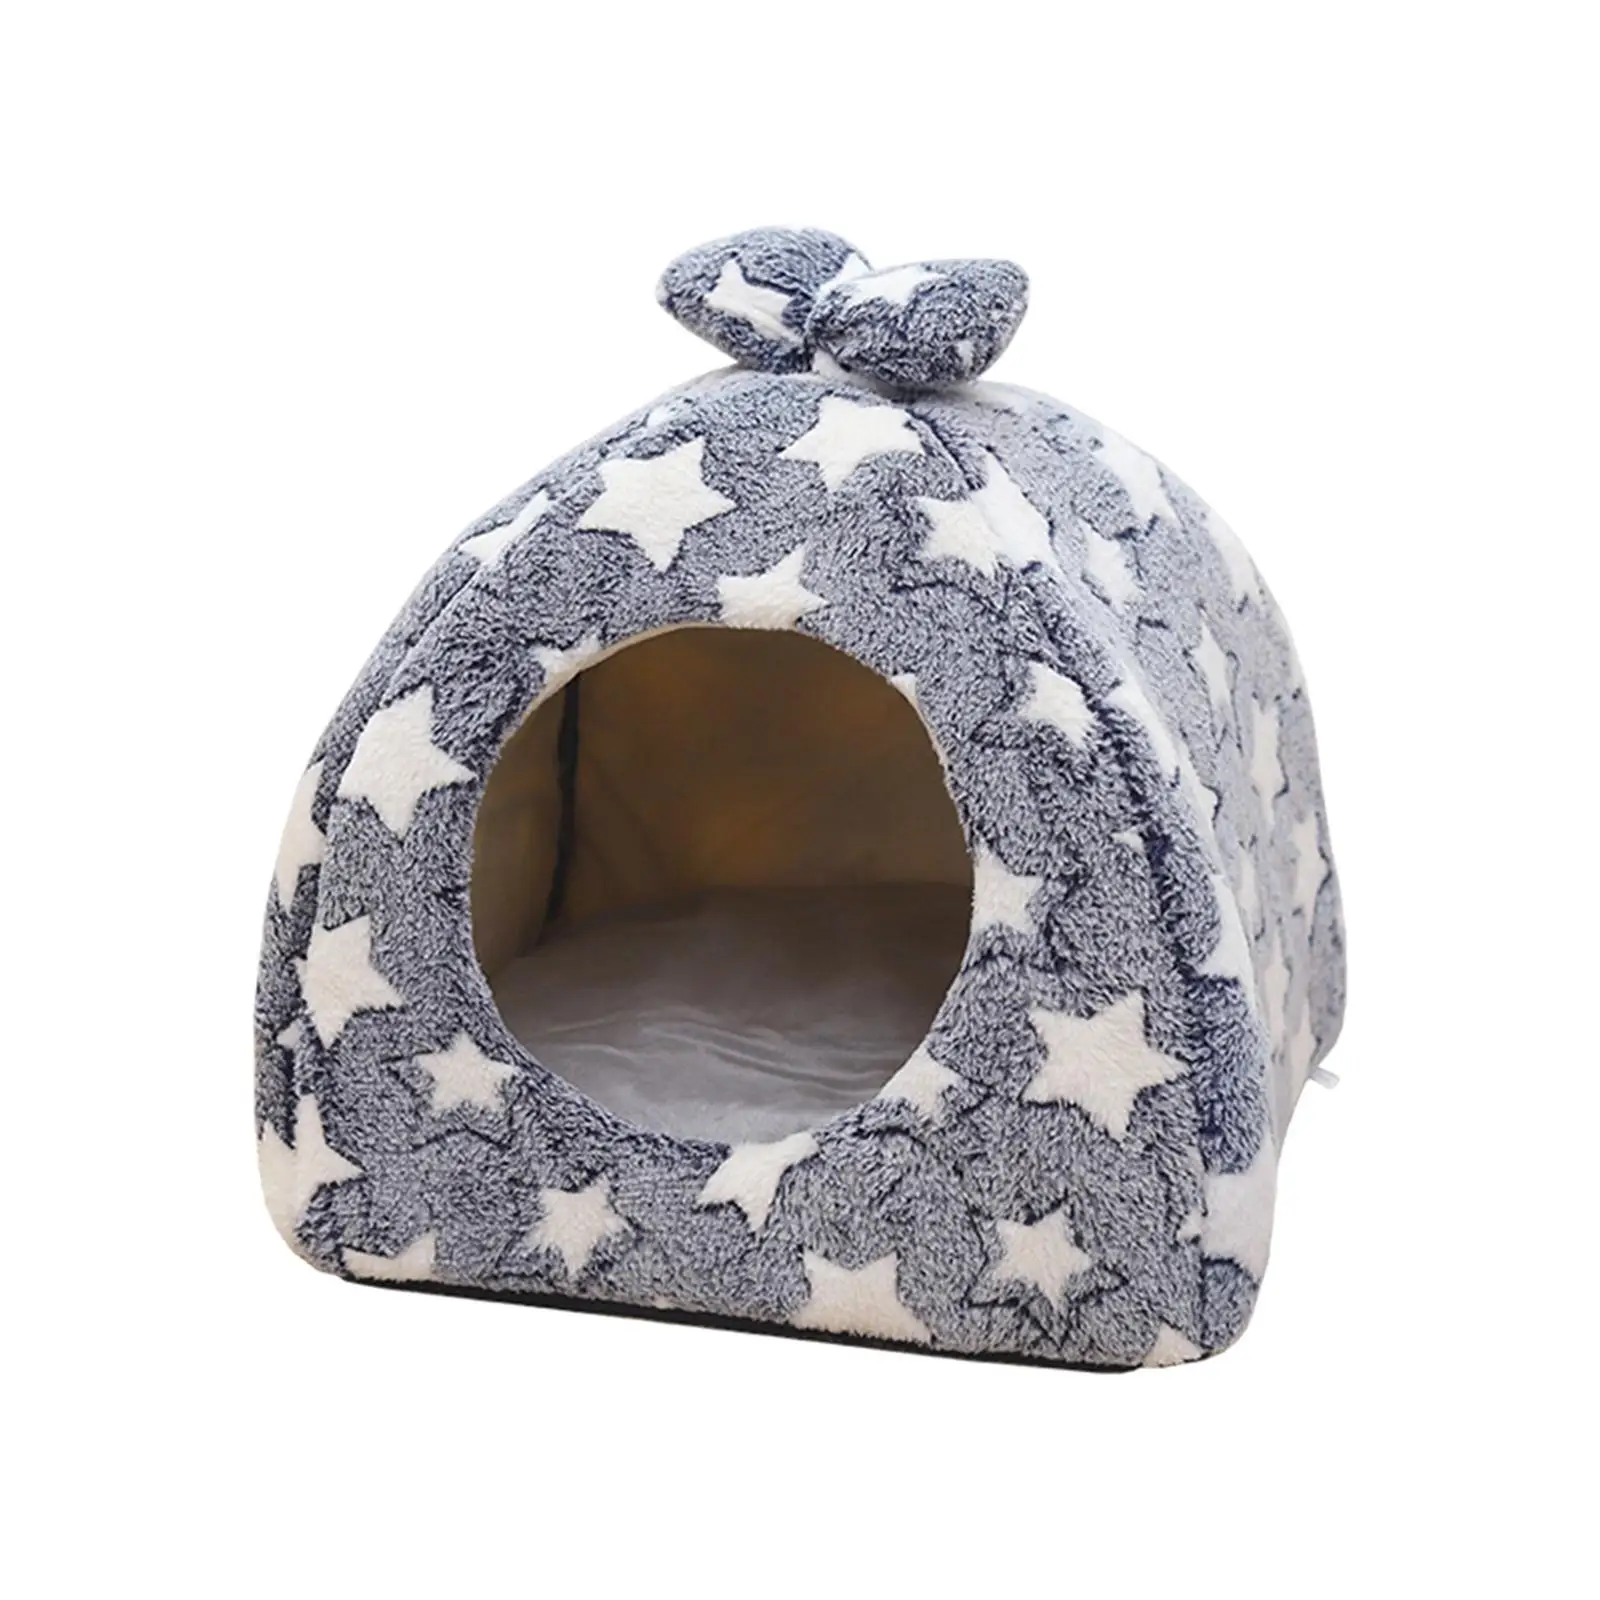 Soft Plush Kittens Cat Bed pet house House for Indoor Cats Lightweight Durable